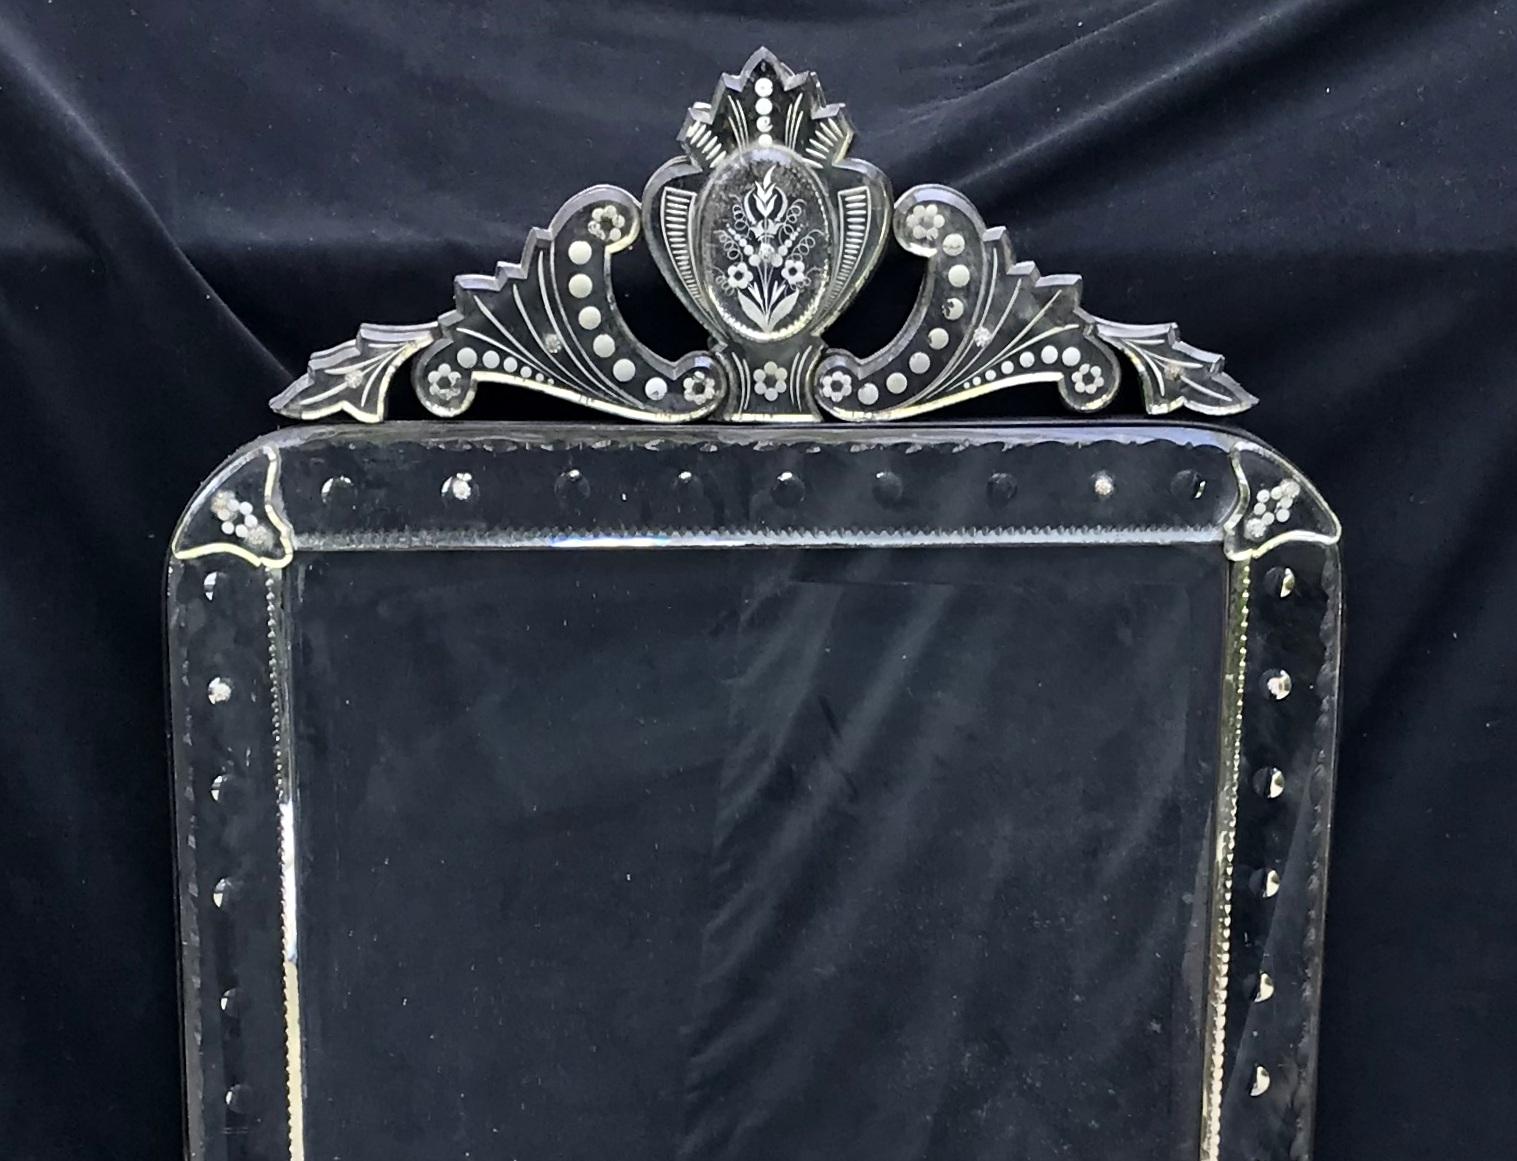 Gorgeous large-scale octagonal Venetian mirror with crown top. Mirror has Fine etched details on top and around the sides as well as beveling. 
Dimensions are 63